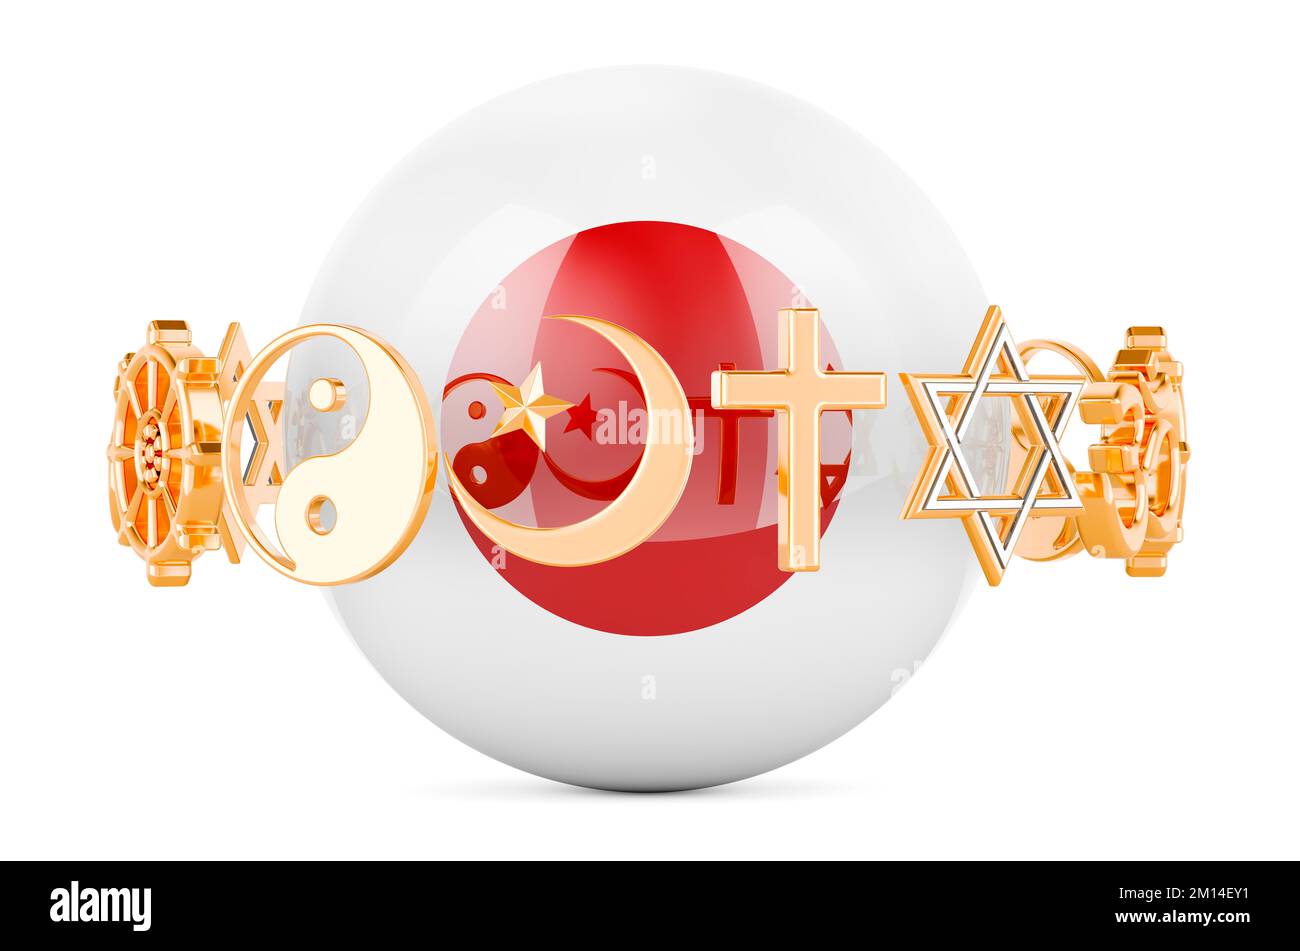 Japanese flag painted on sphere with religions symbols around, 3D rendering isolated on white background Stock Photo